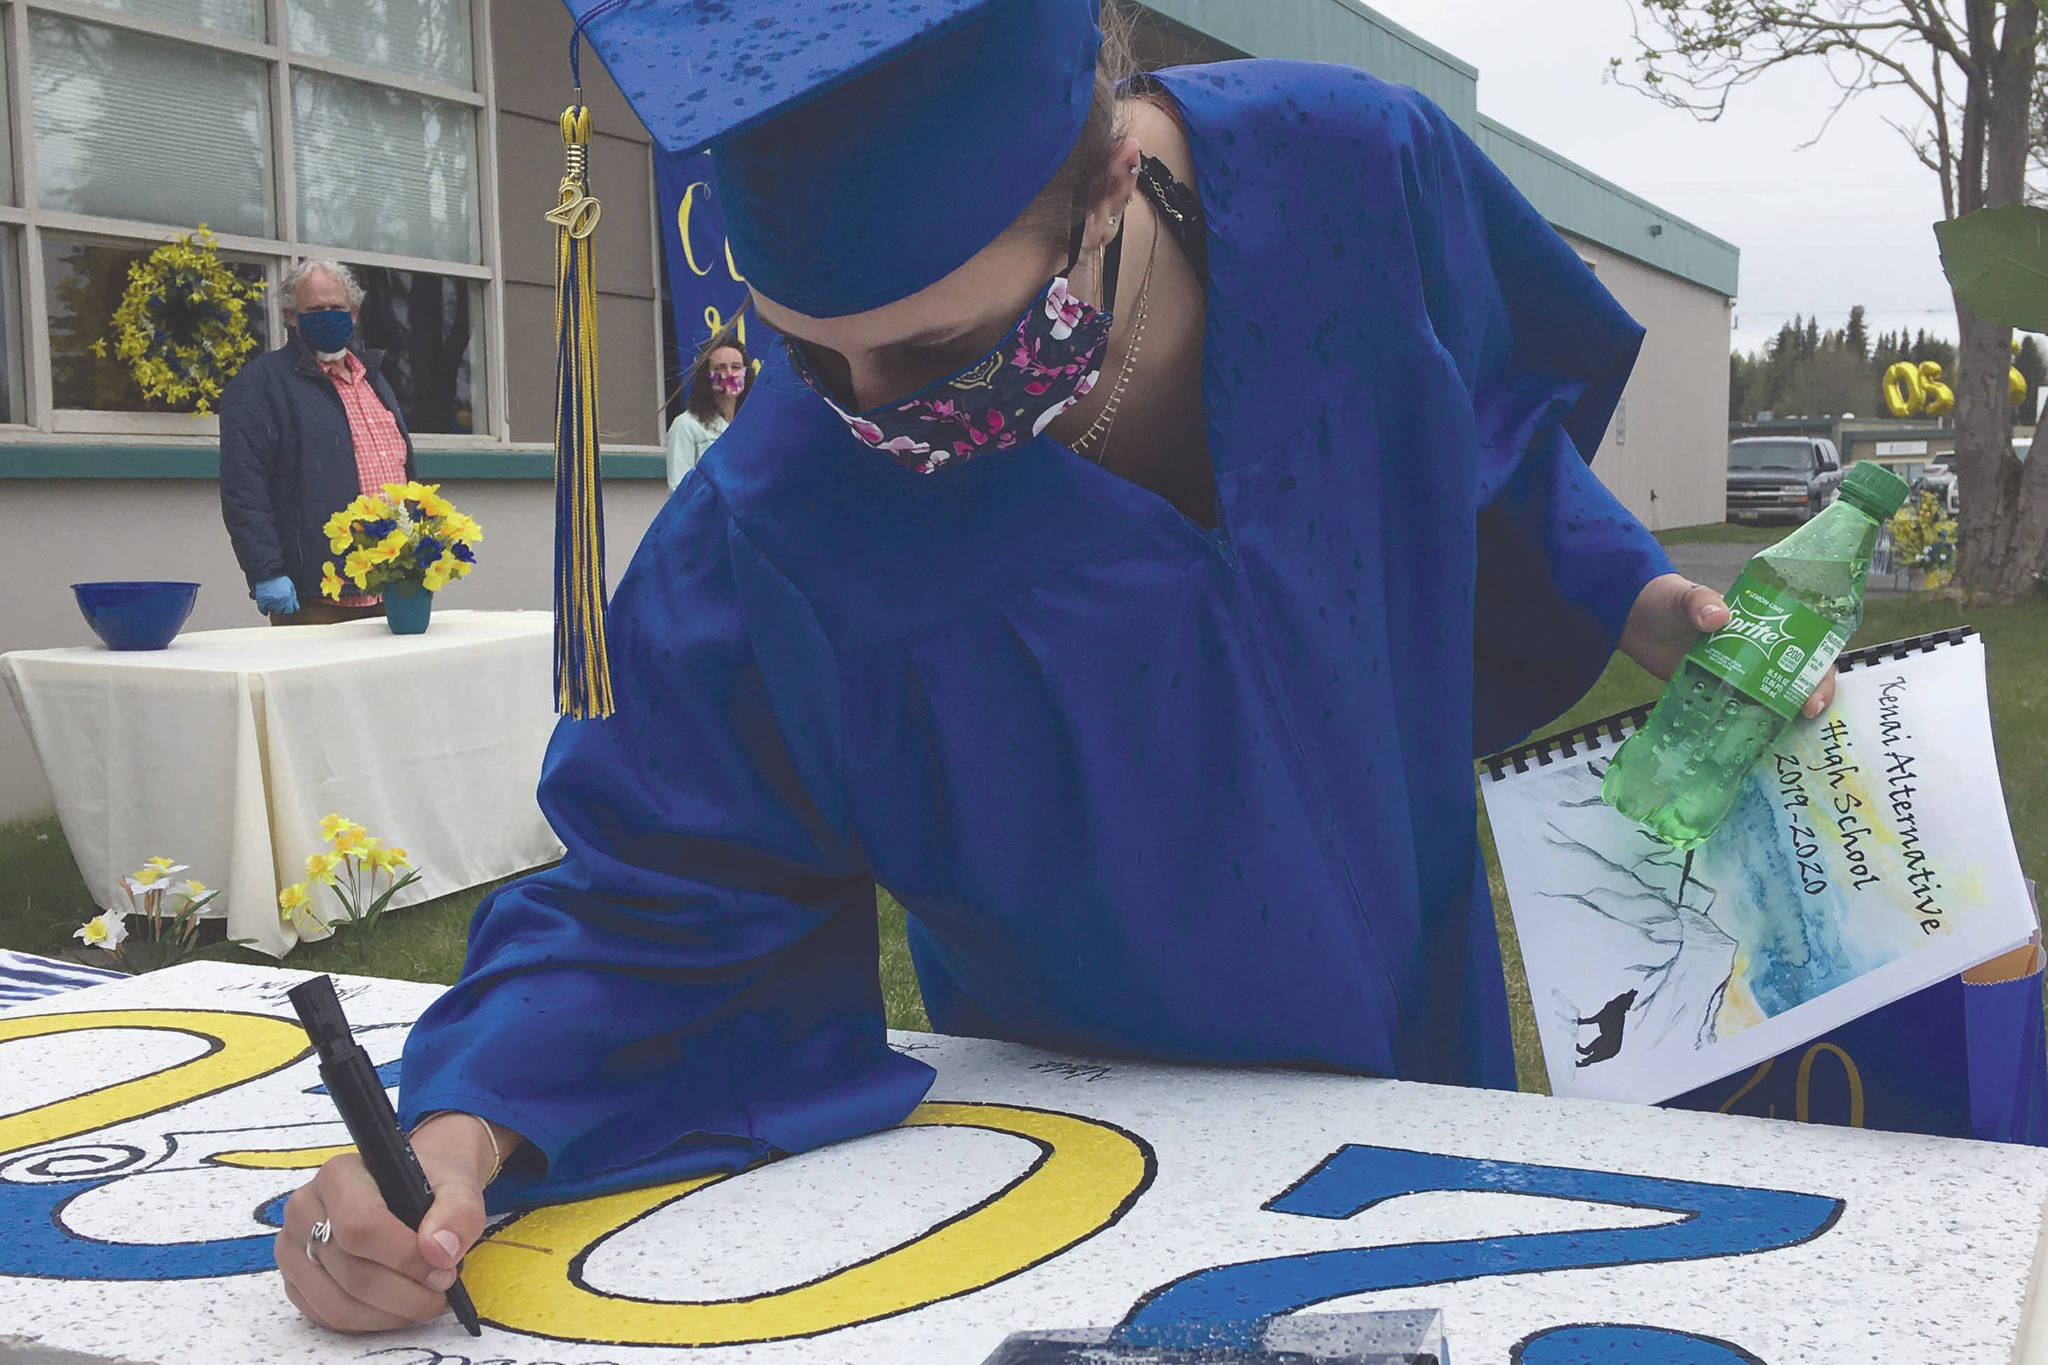 Kenai Alternative High School graduate Elsie Daniels signs the ceiling tile for the Class of 2020 at the KAHS graduation Monday in Kenai, Alaska. The tile will join other graduating classes in the ceiling of the school office. (Photo by Jeff Helminiak/Peninsula Clarion)